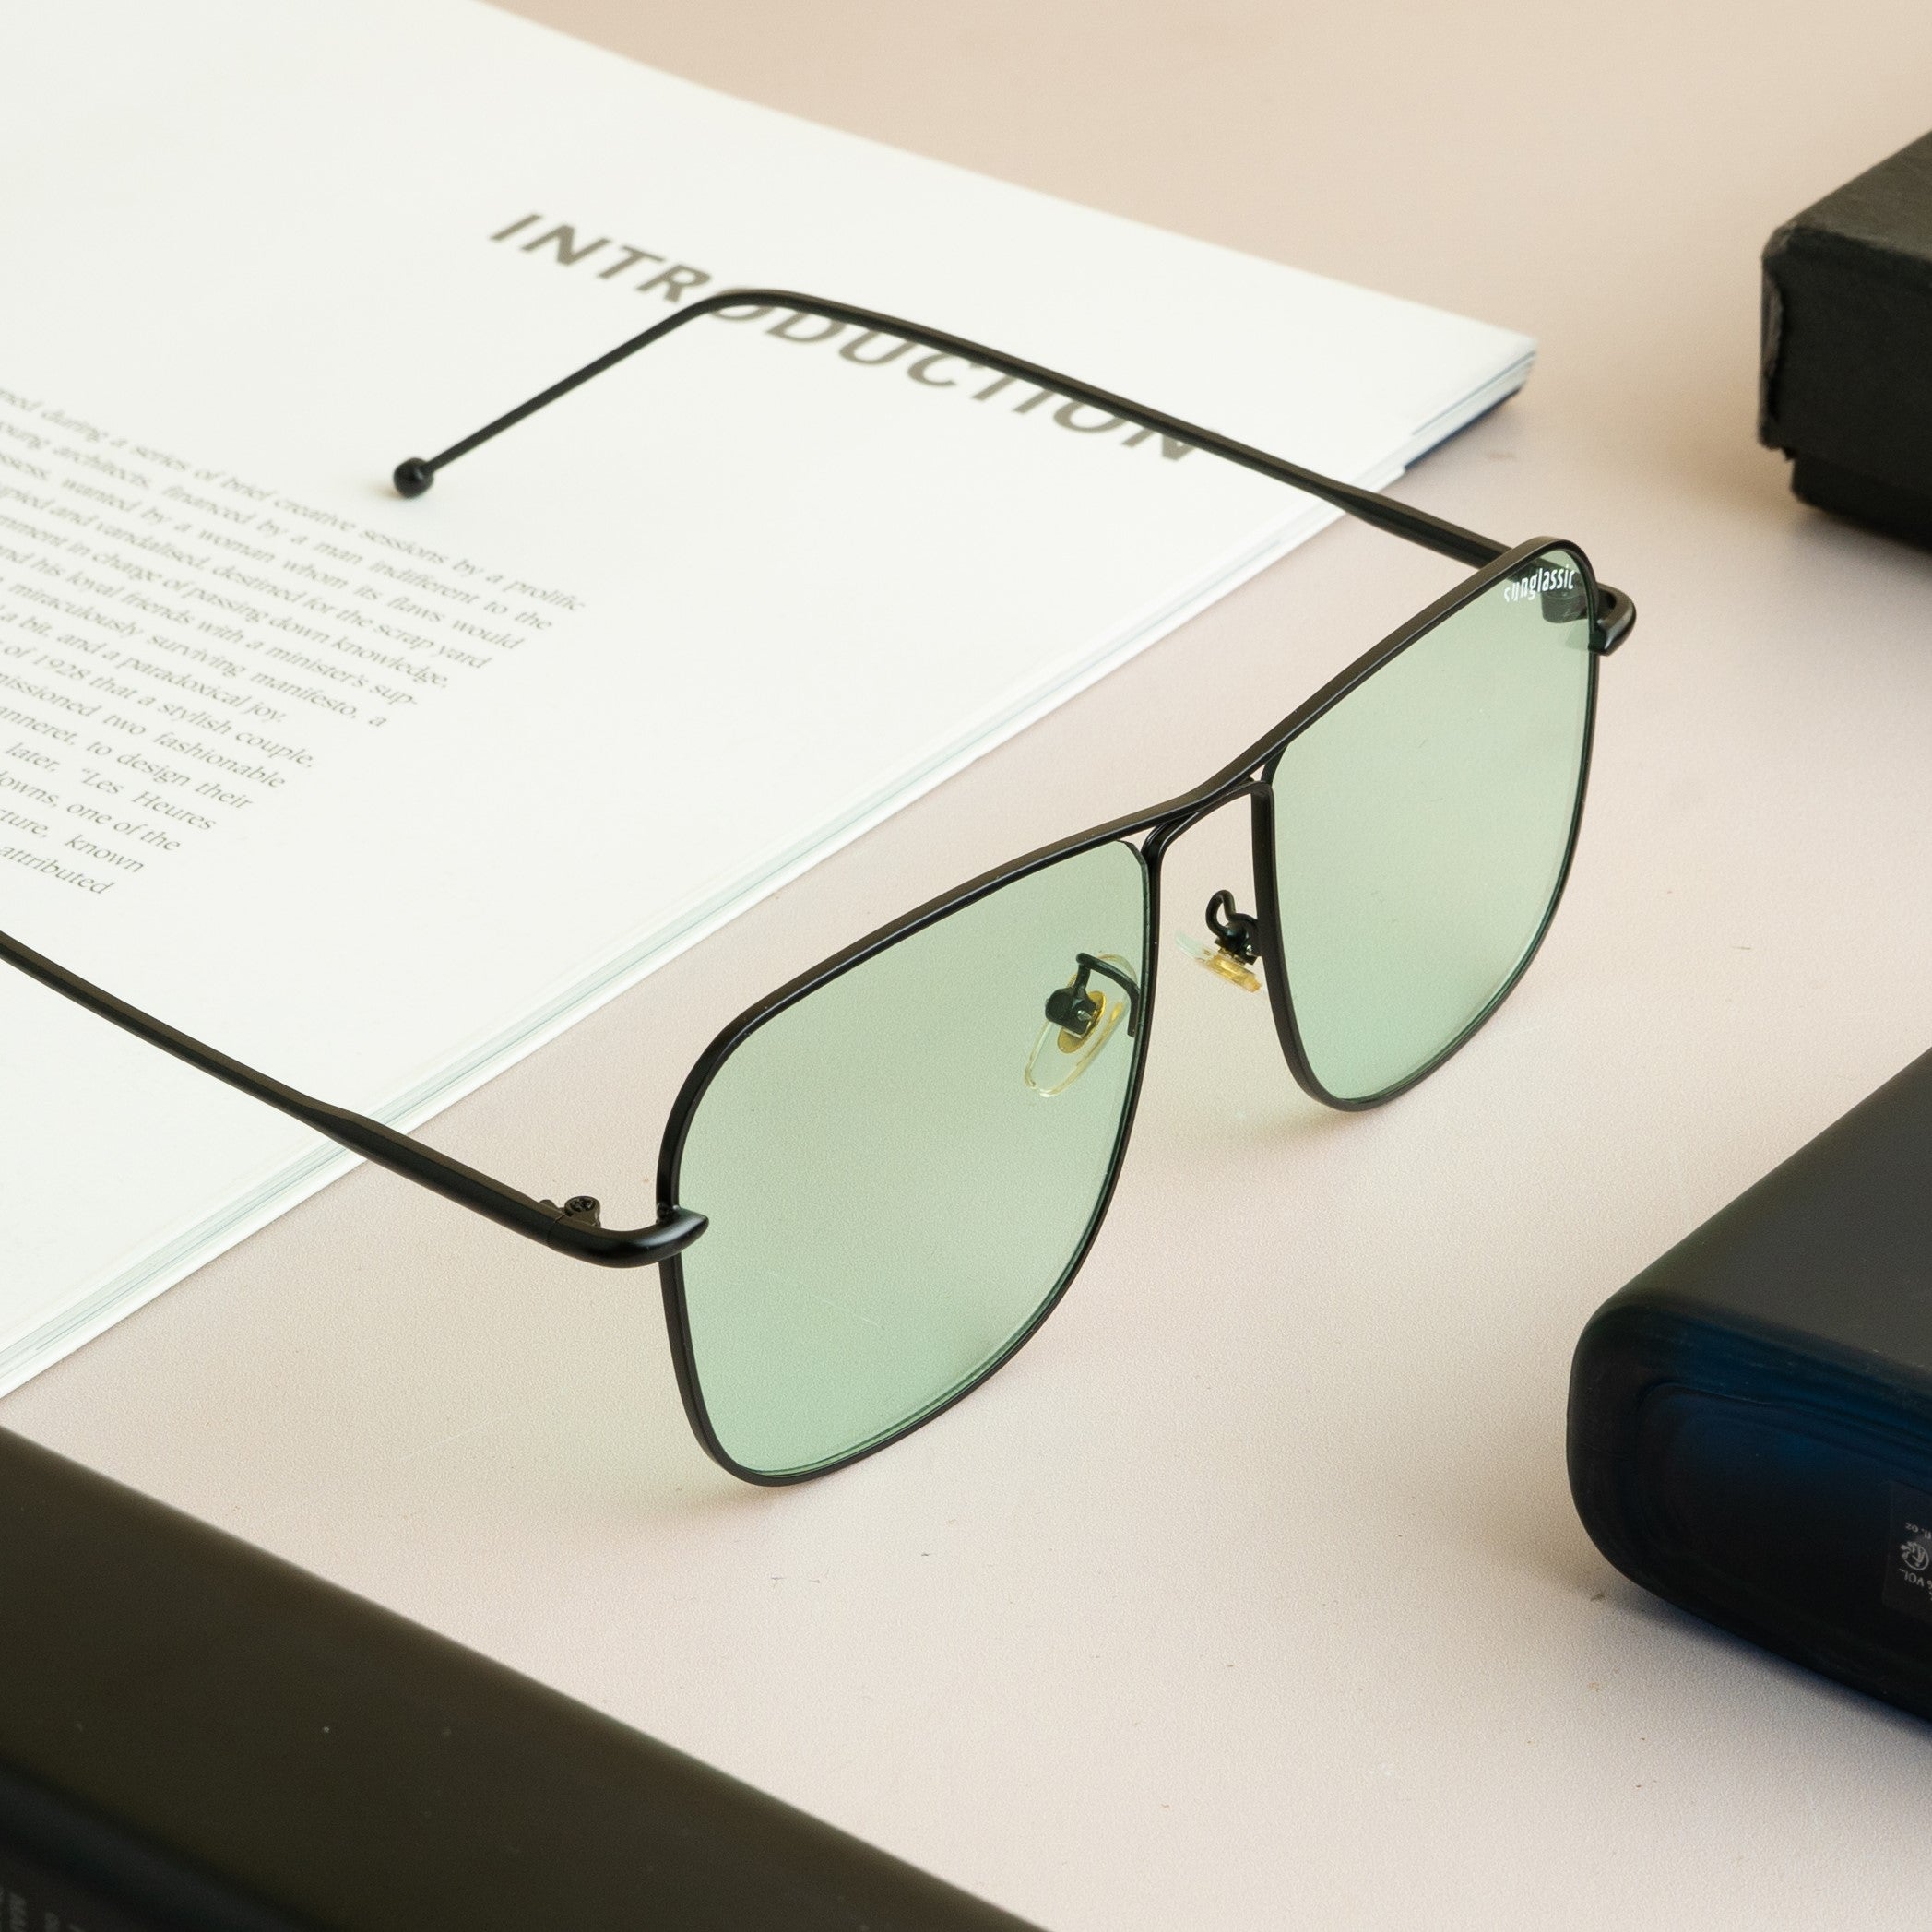 The Godfather Black Green Candy Square Sunglasses